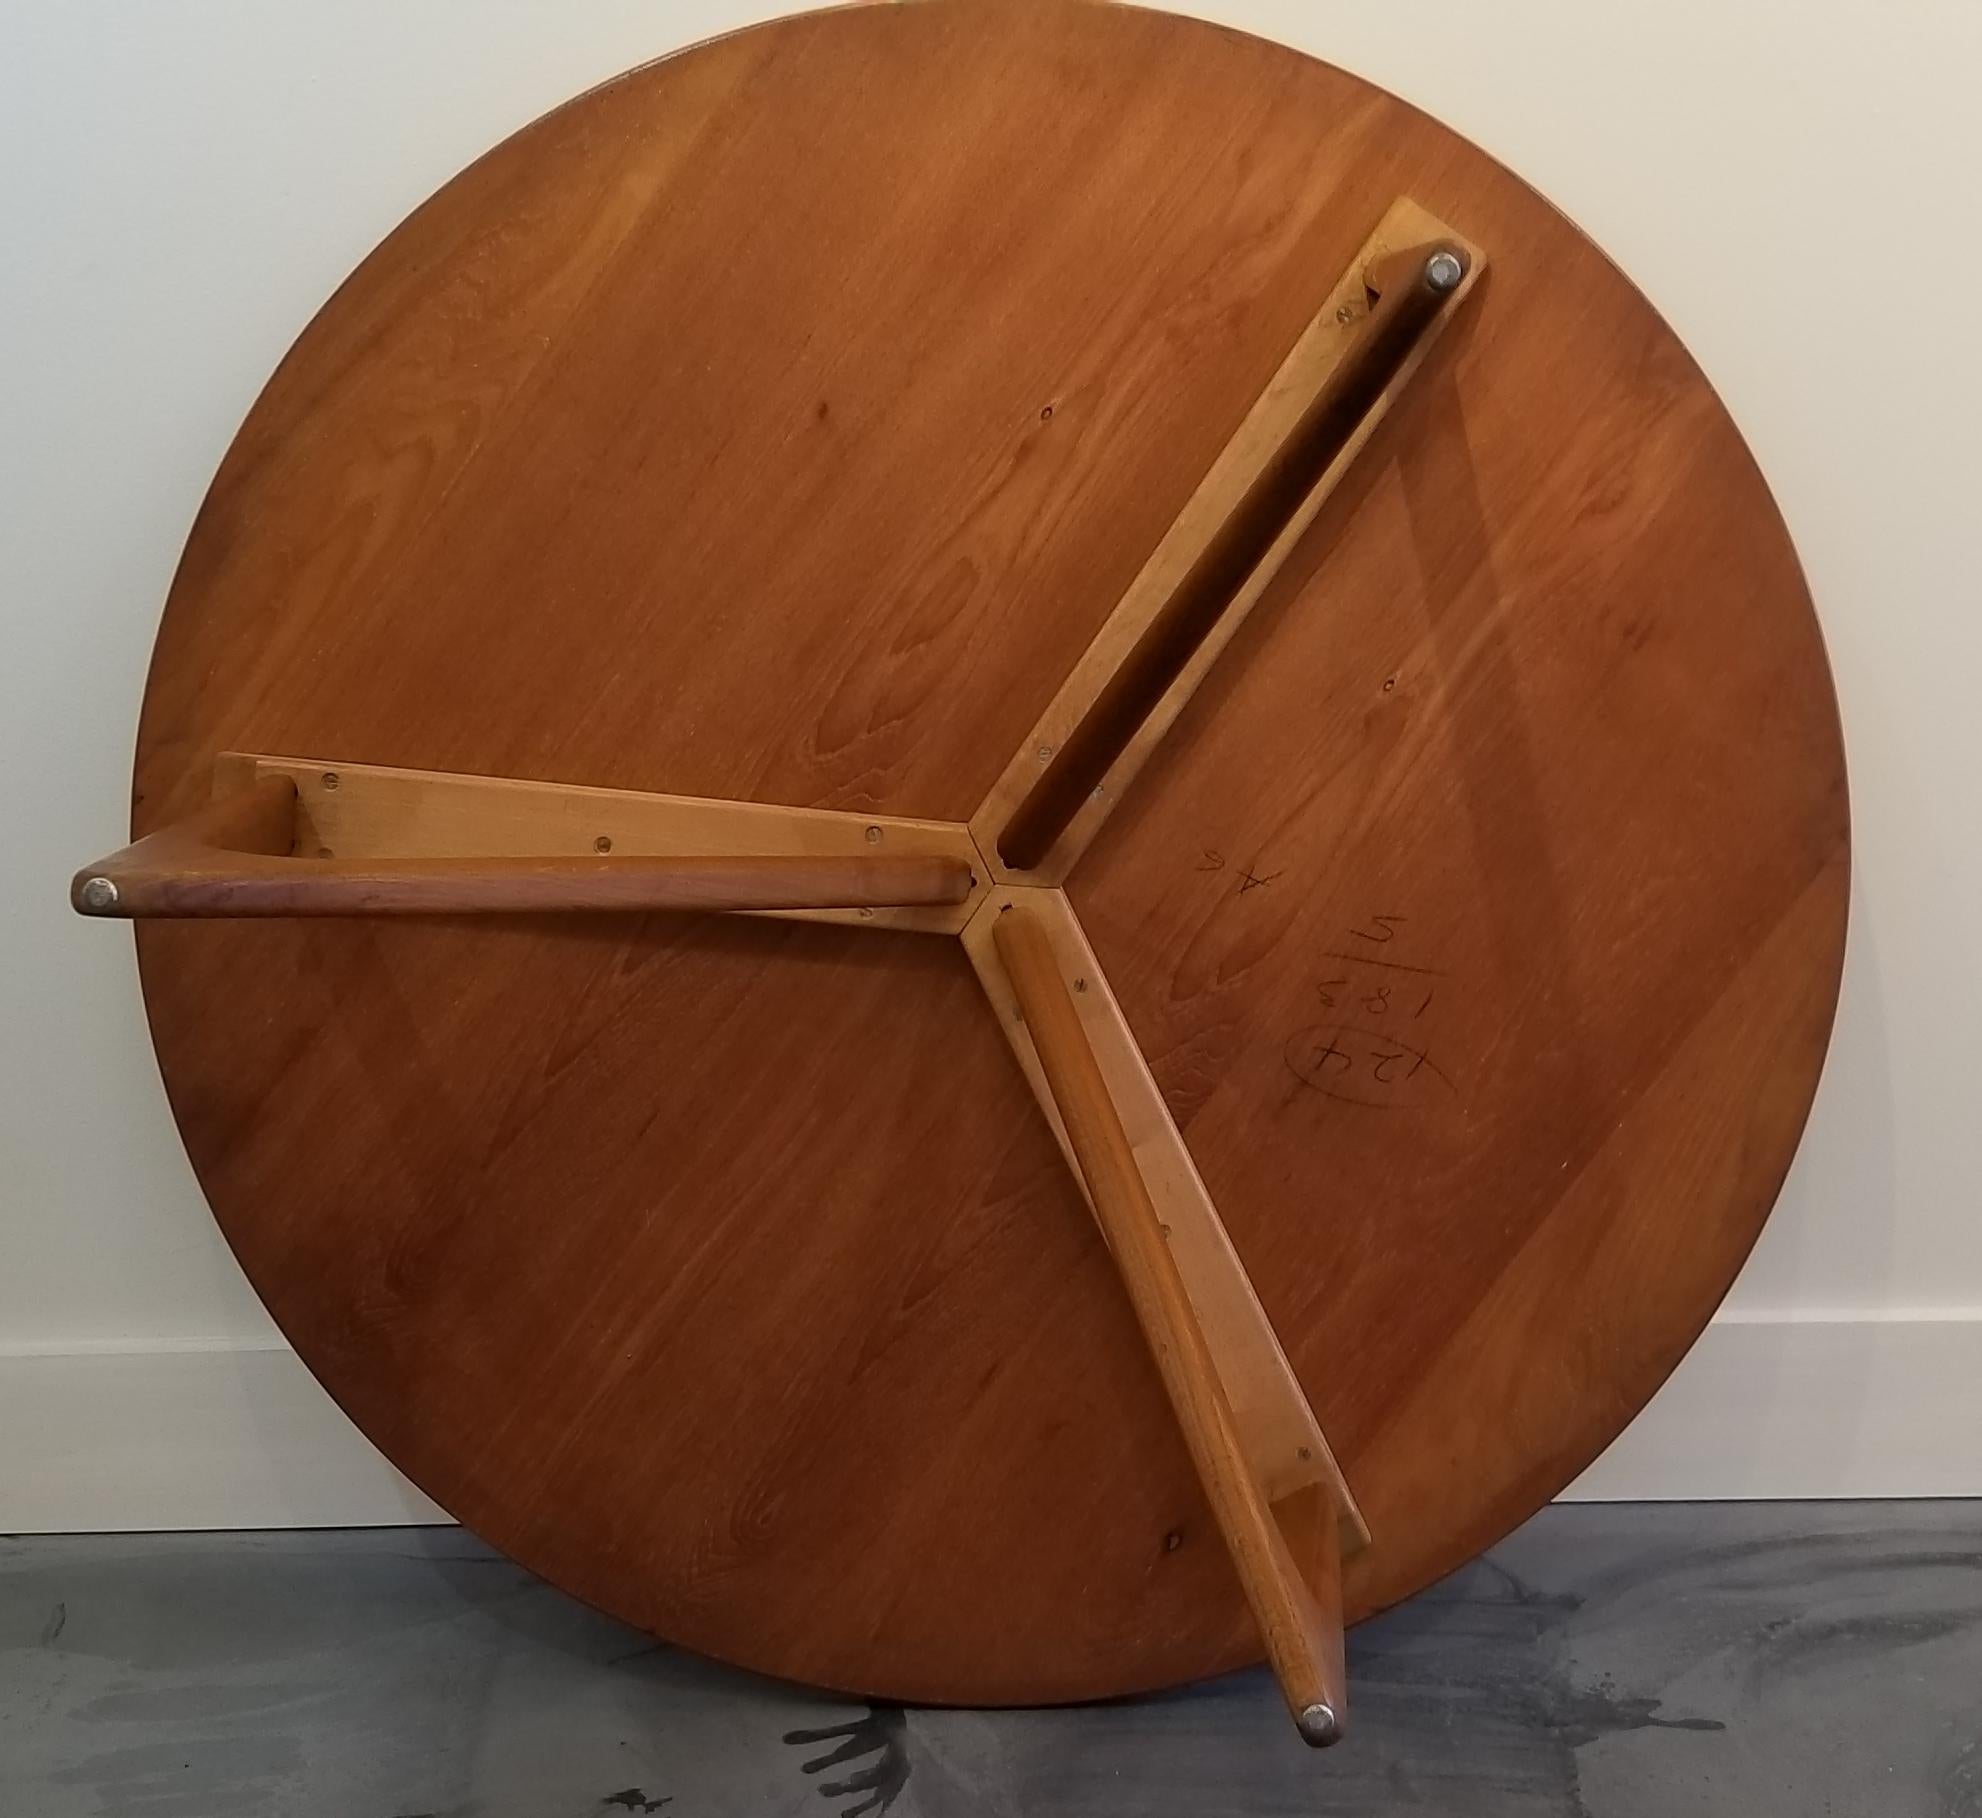 Teak Danish Modern Round Coffee or Side Table In Good Condition For Sale In Fulton, CA